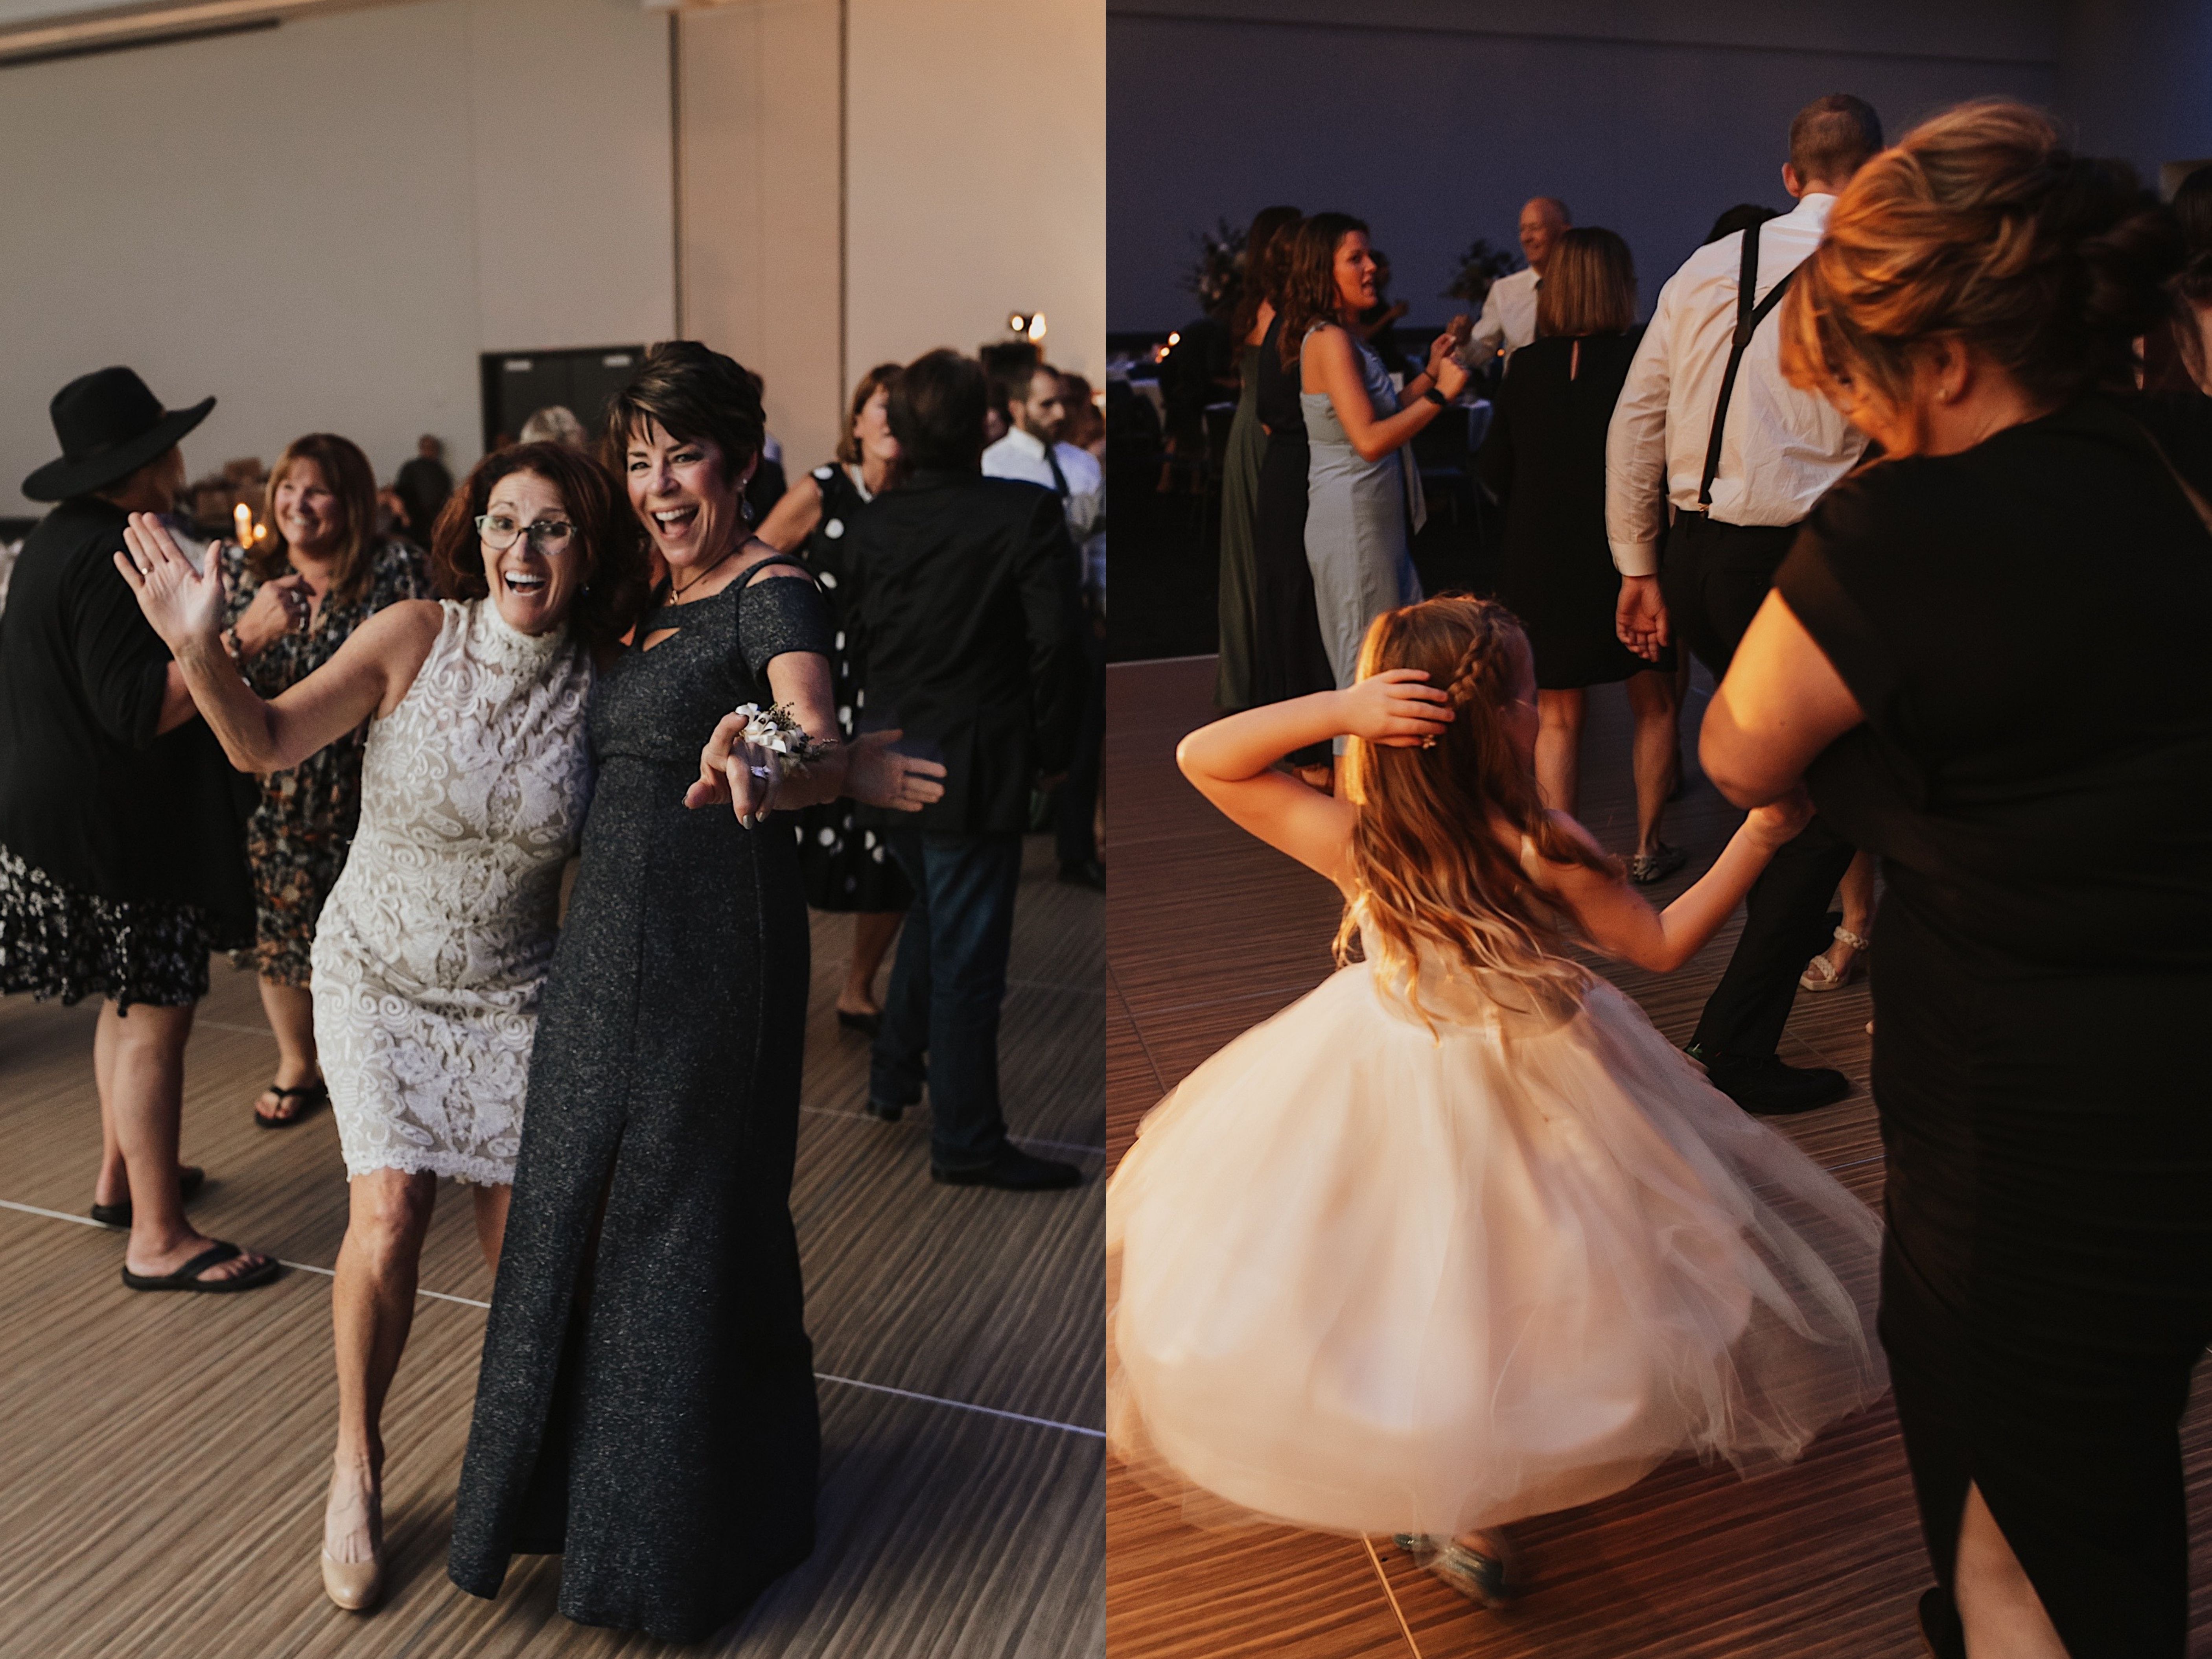 2 side by side photos of guests dancing at a wedding, the left is of two women smiling at the camera and the right is of a little girl spinning in her dress